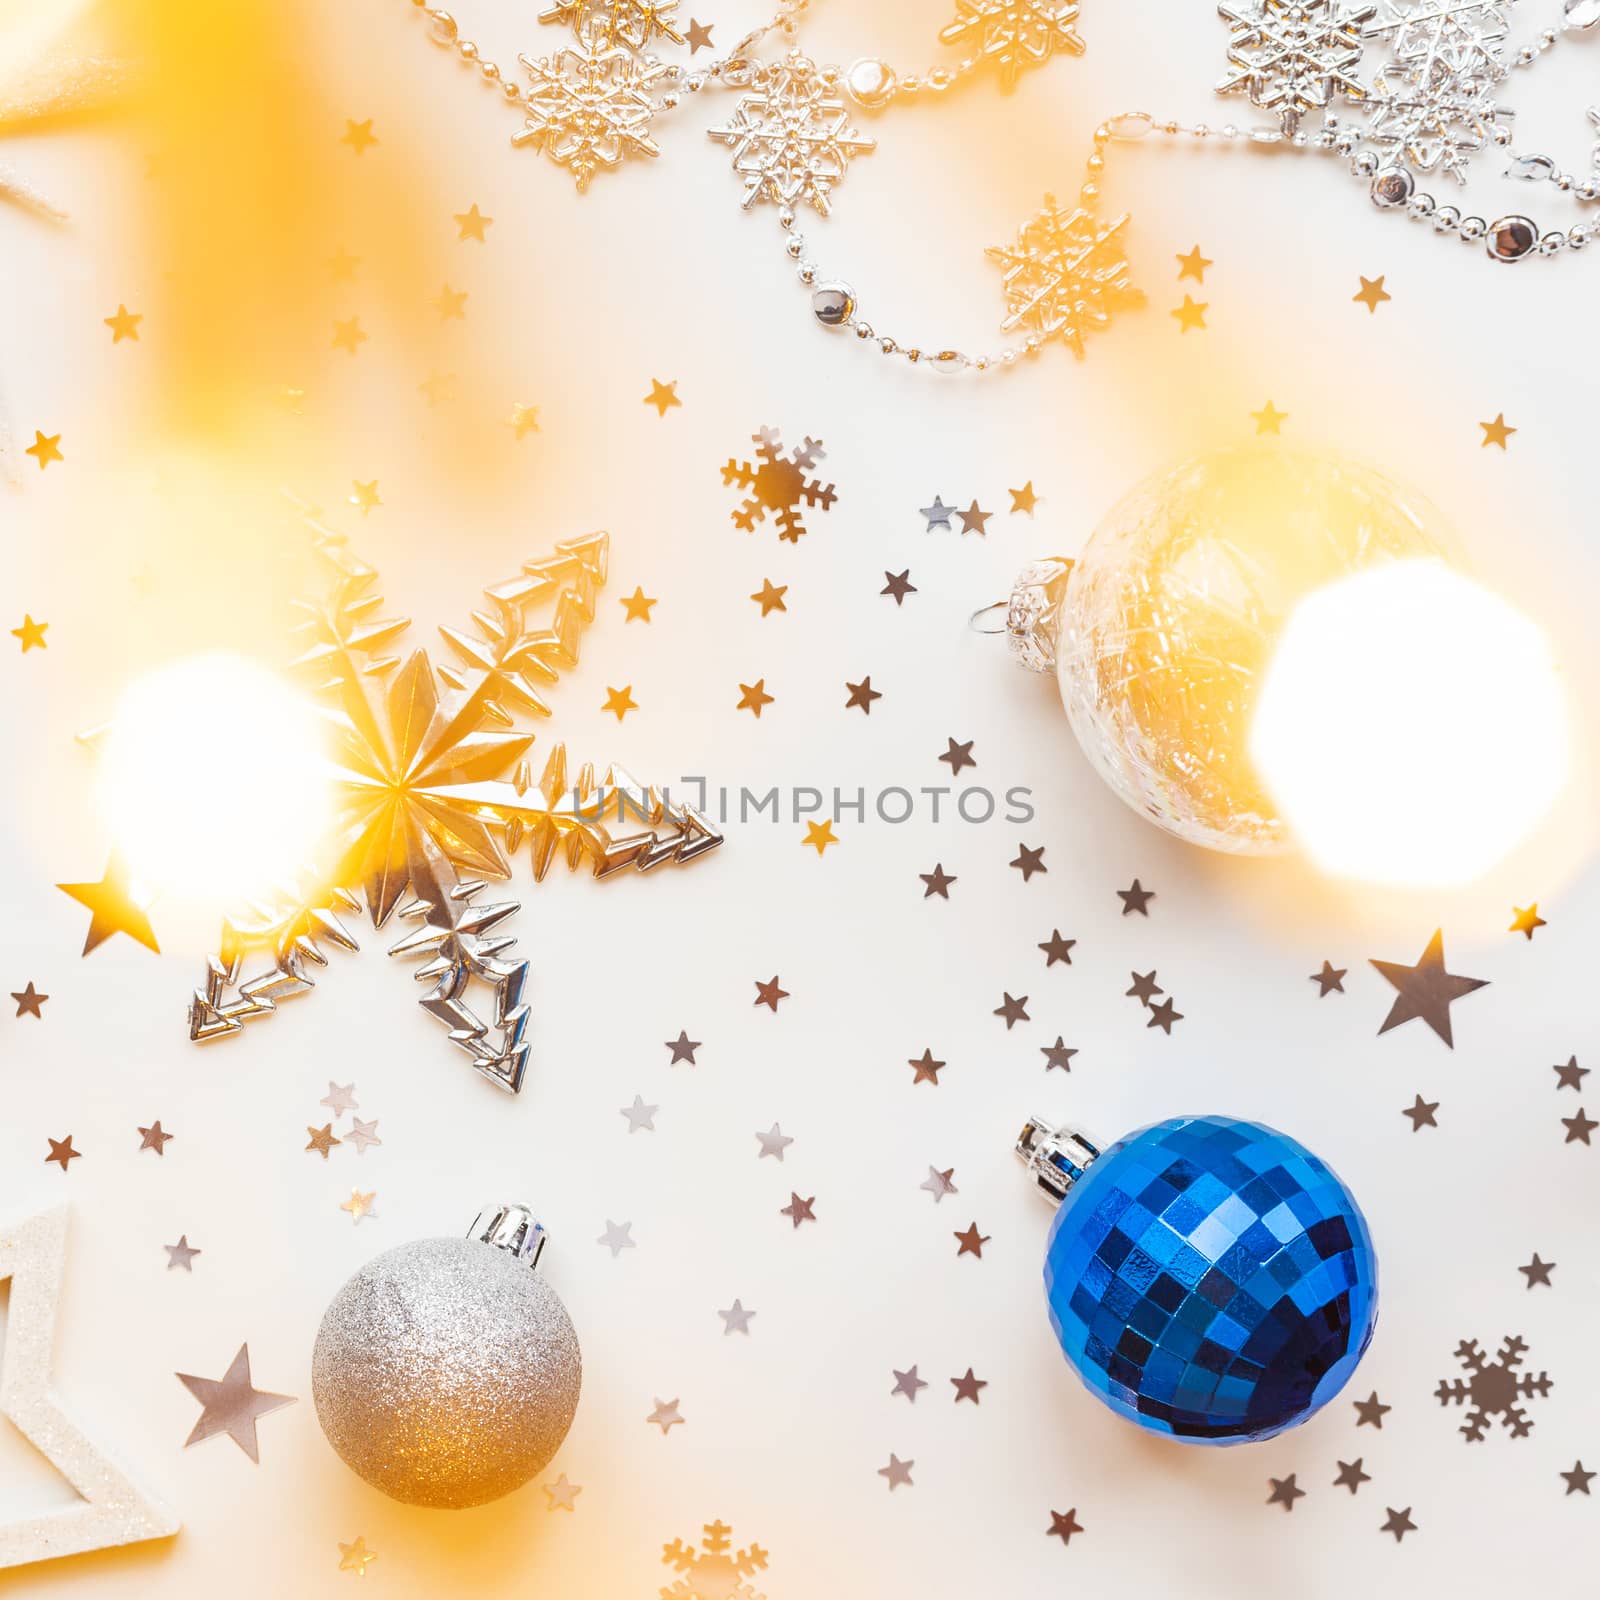 Christmas and New Year holiday background with decorations and light bulbs. Silver and blue shining balls, white snowflakes and star confetti. Flat lay, top view.